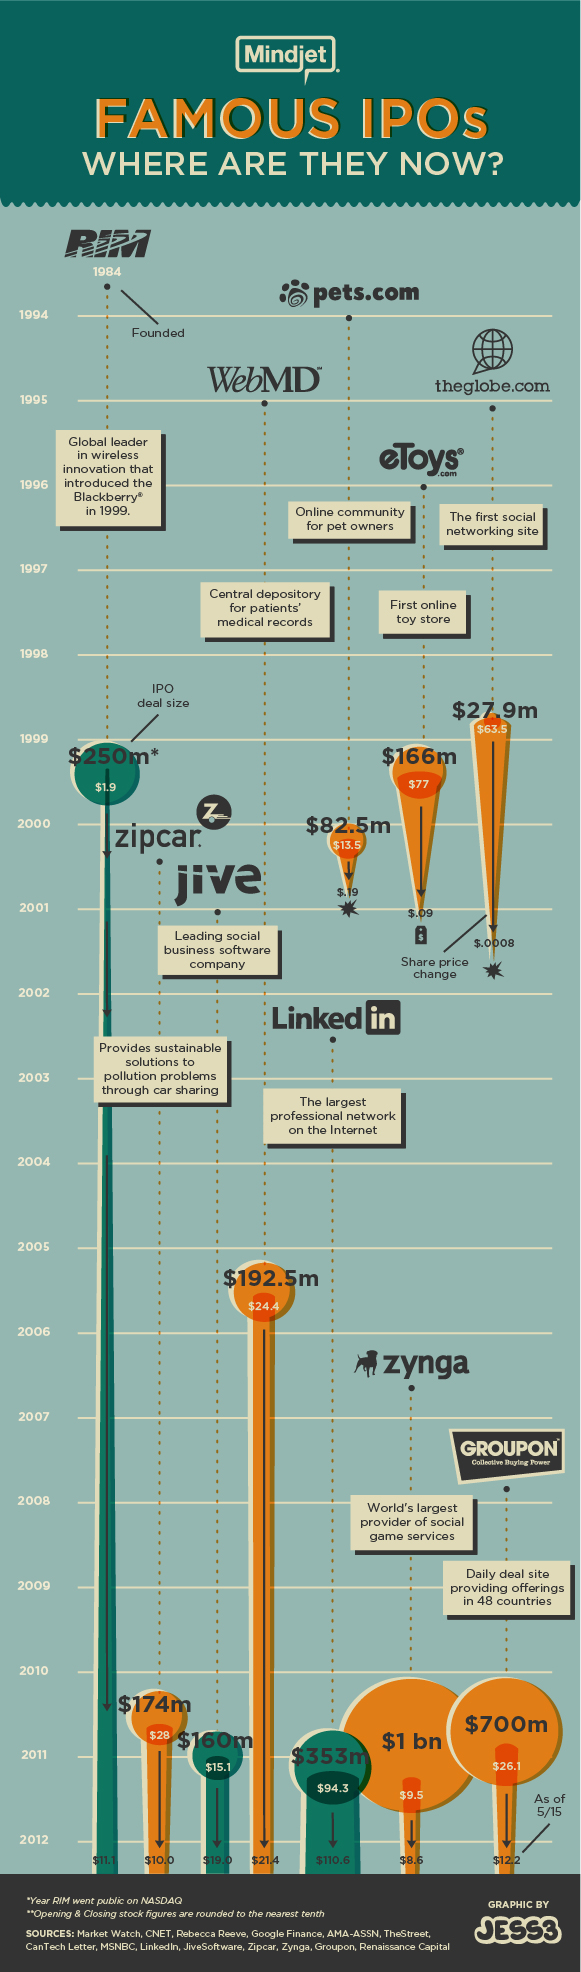 Famous IPOs: Where Are They Now [Infographic]